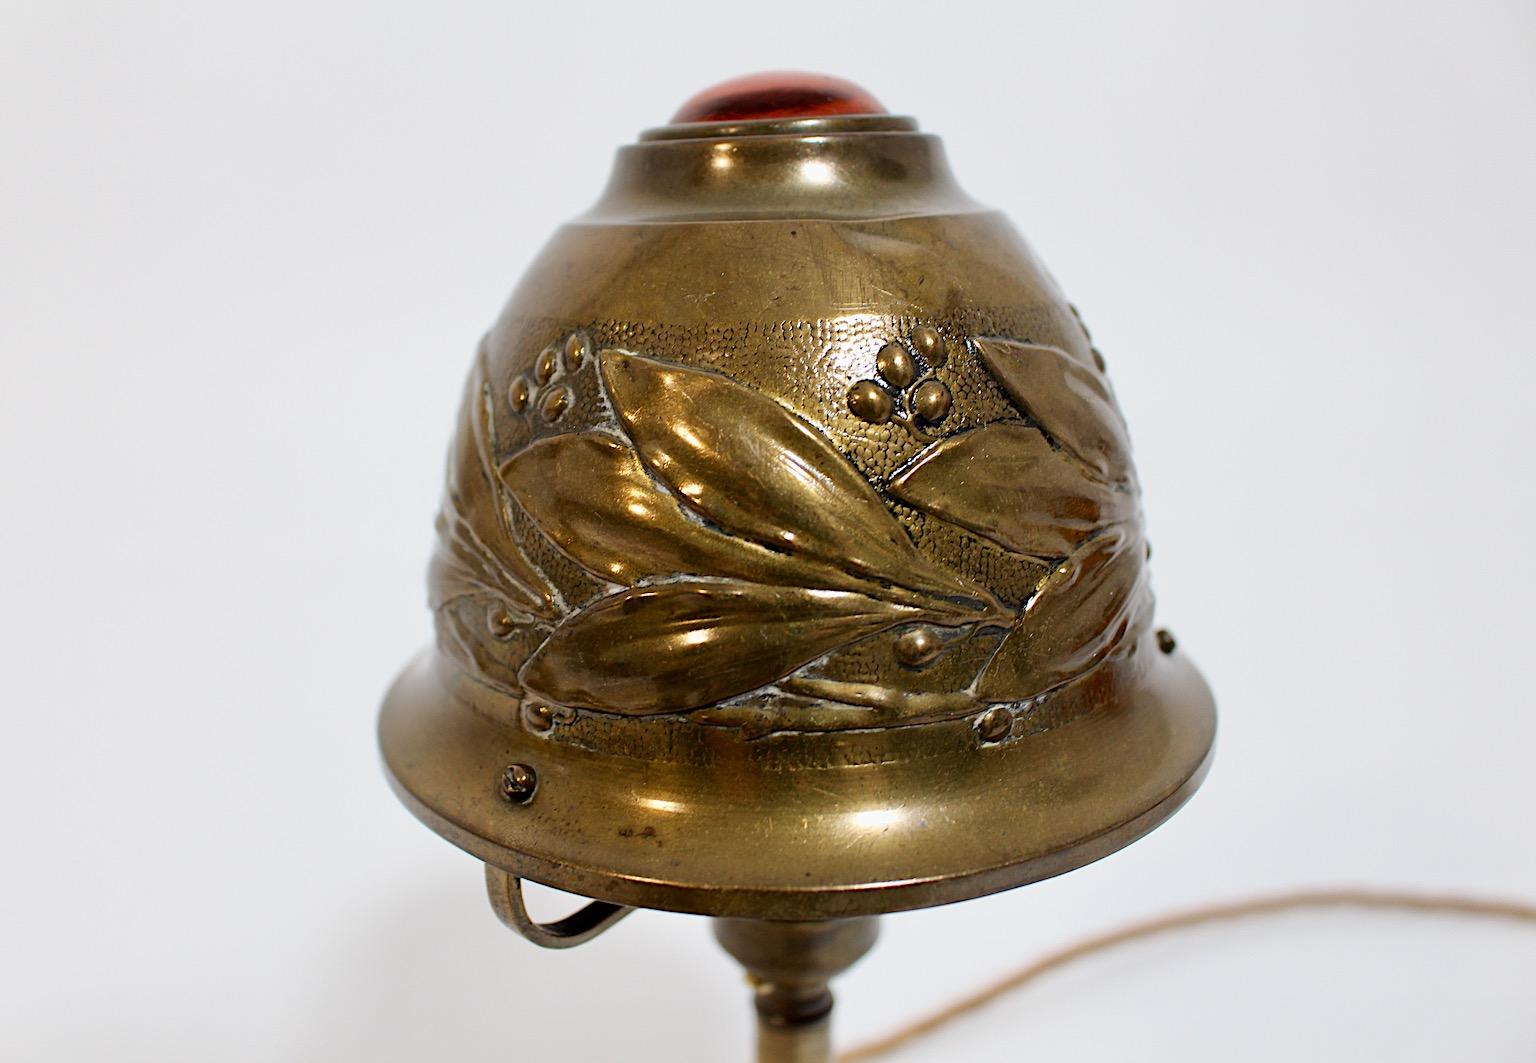 Art Nouveau vintage dome table lamp or bedside lamp from brass and glass decor stone circa 1910 France.
A stunning table lamp from brass with an embossed dome shade and a decor stone in amber color.
The dome shade shows embossed leaves, while the